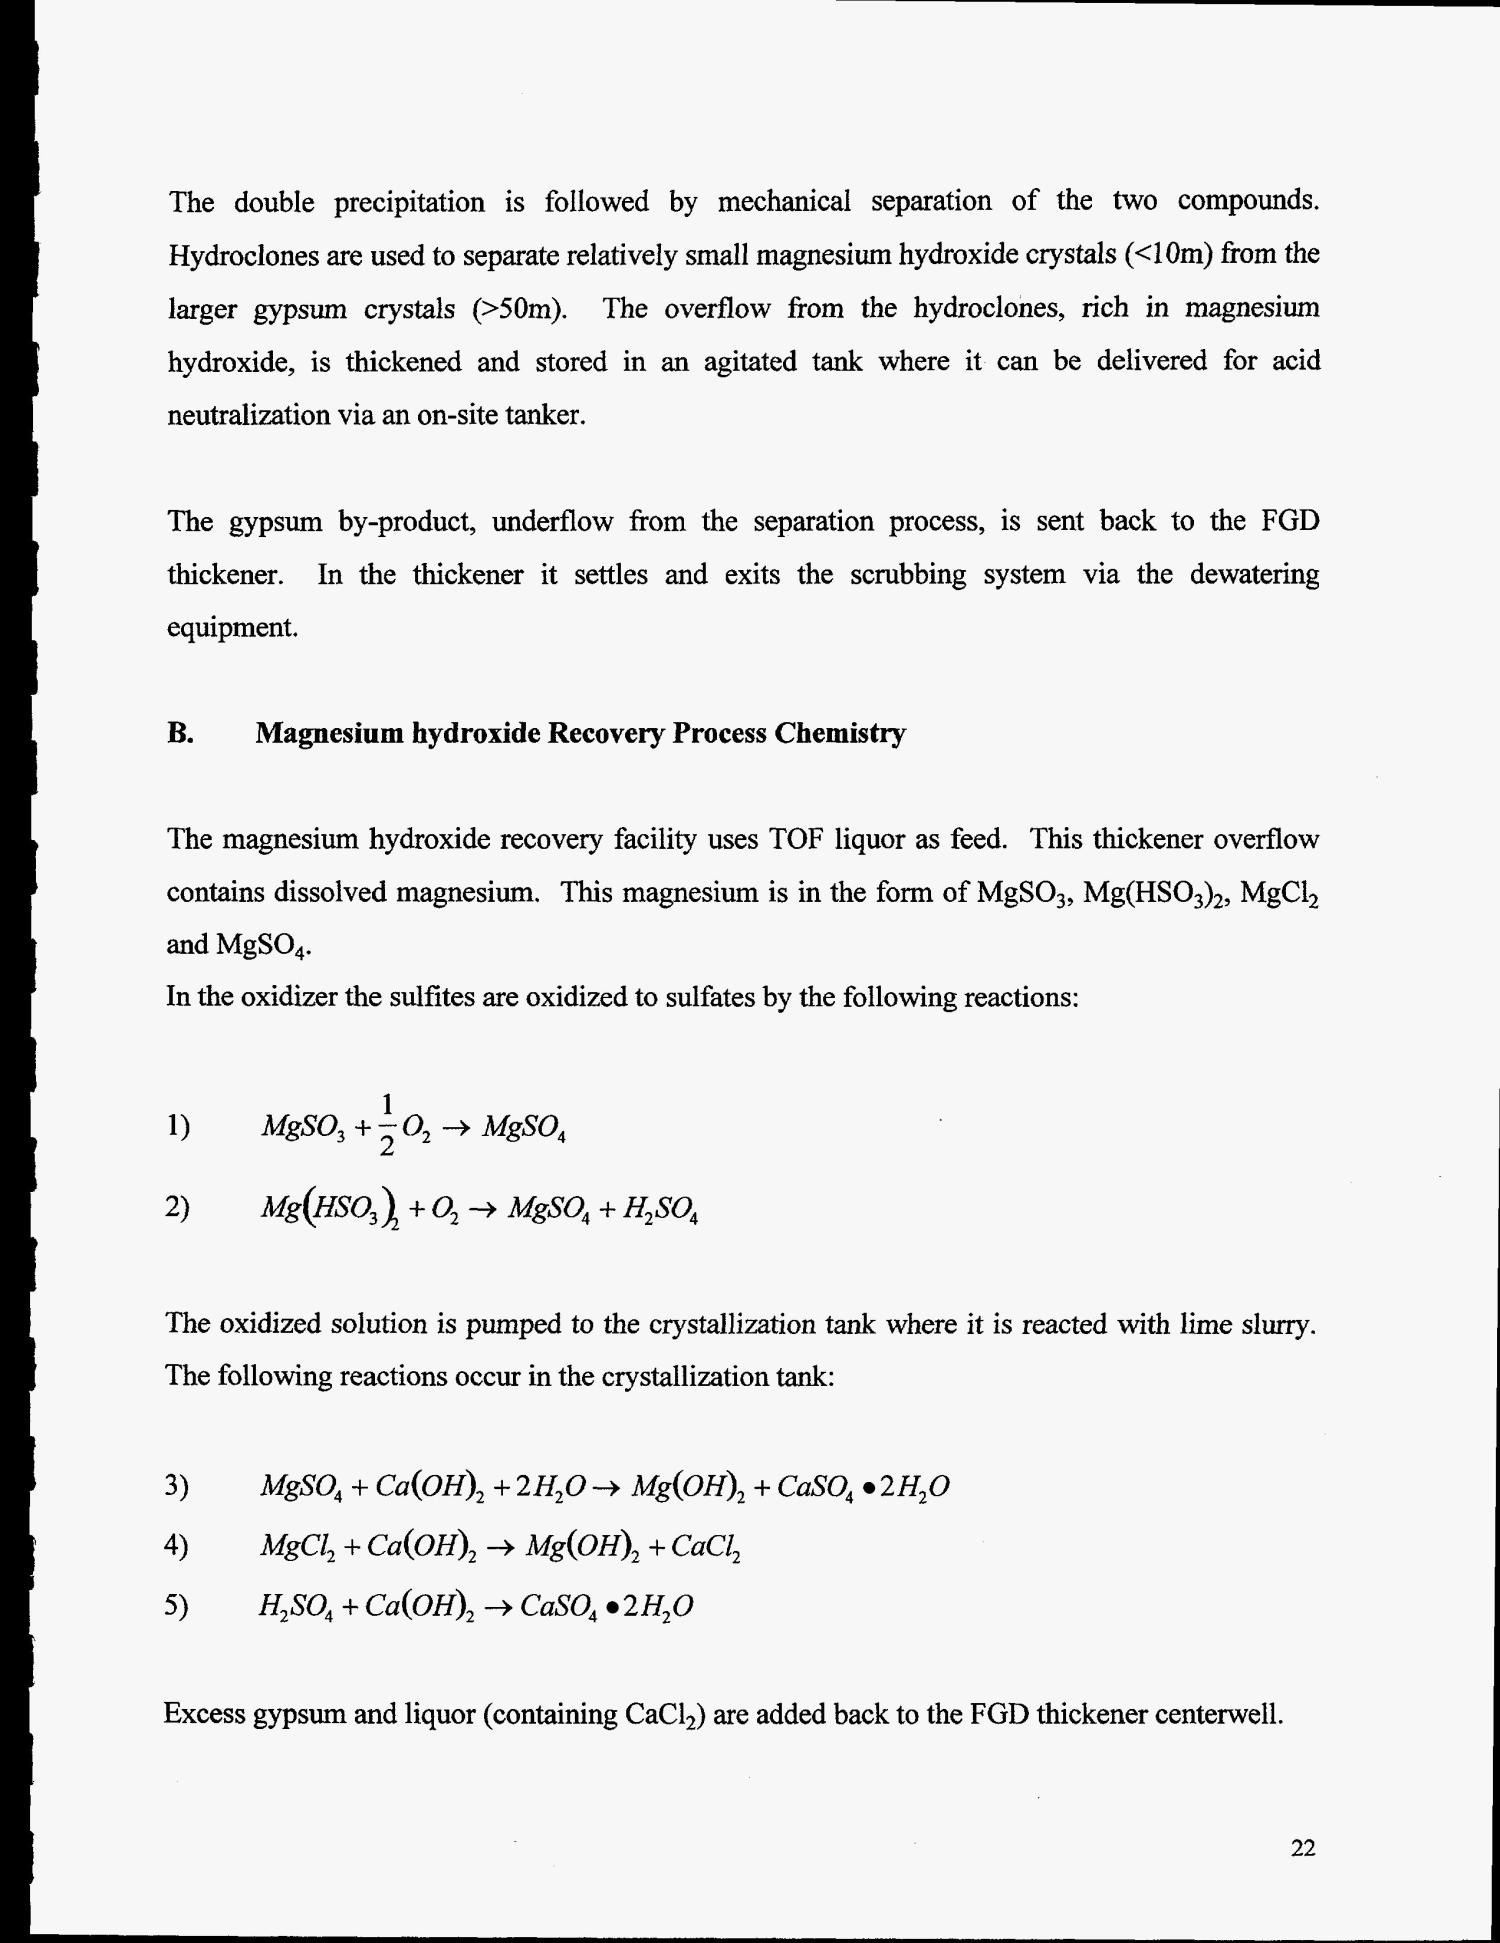 Zimmer slipstream magnesium hydroxide recovery demonstration. Volume I of II. Final report, April 1, 1993--May 31, 1995
                                                
                                                    [Sequence #]: 30 of 132
                                                